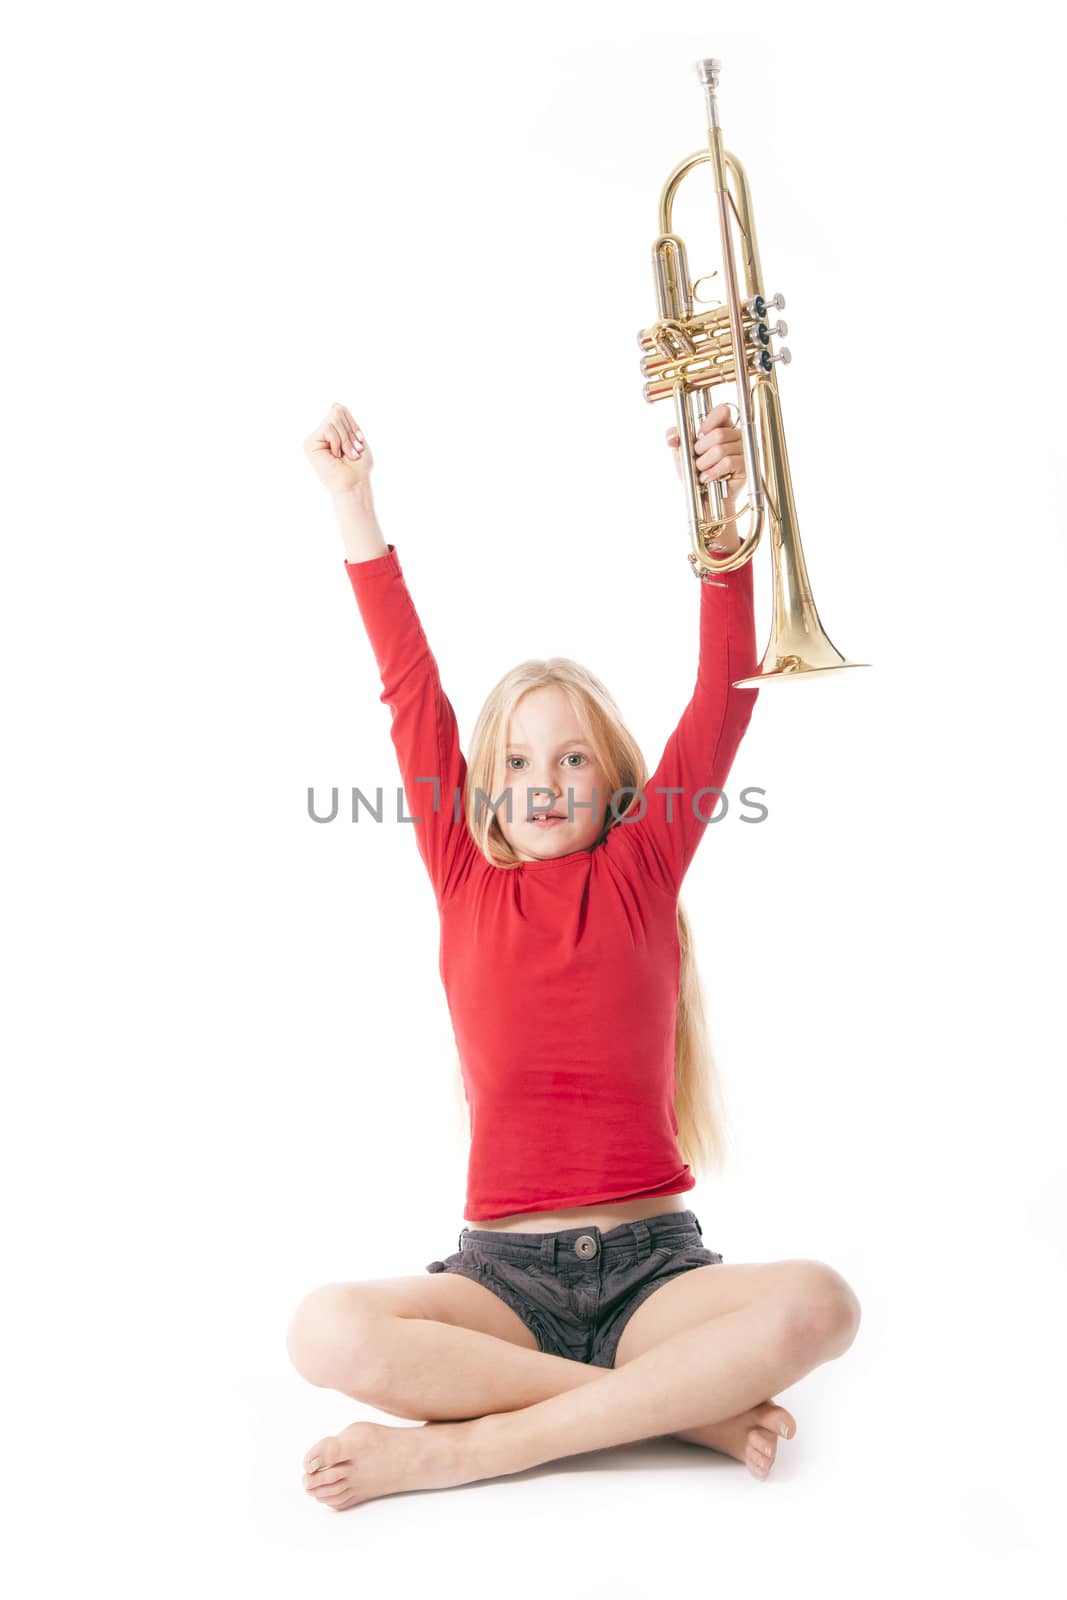 young girl in red holding trumpet in the air against white backgound